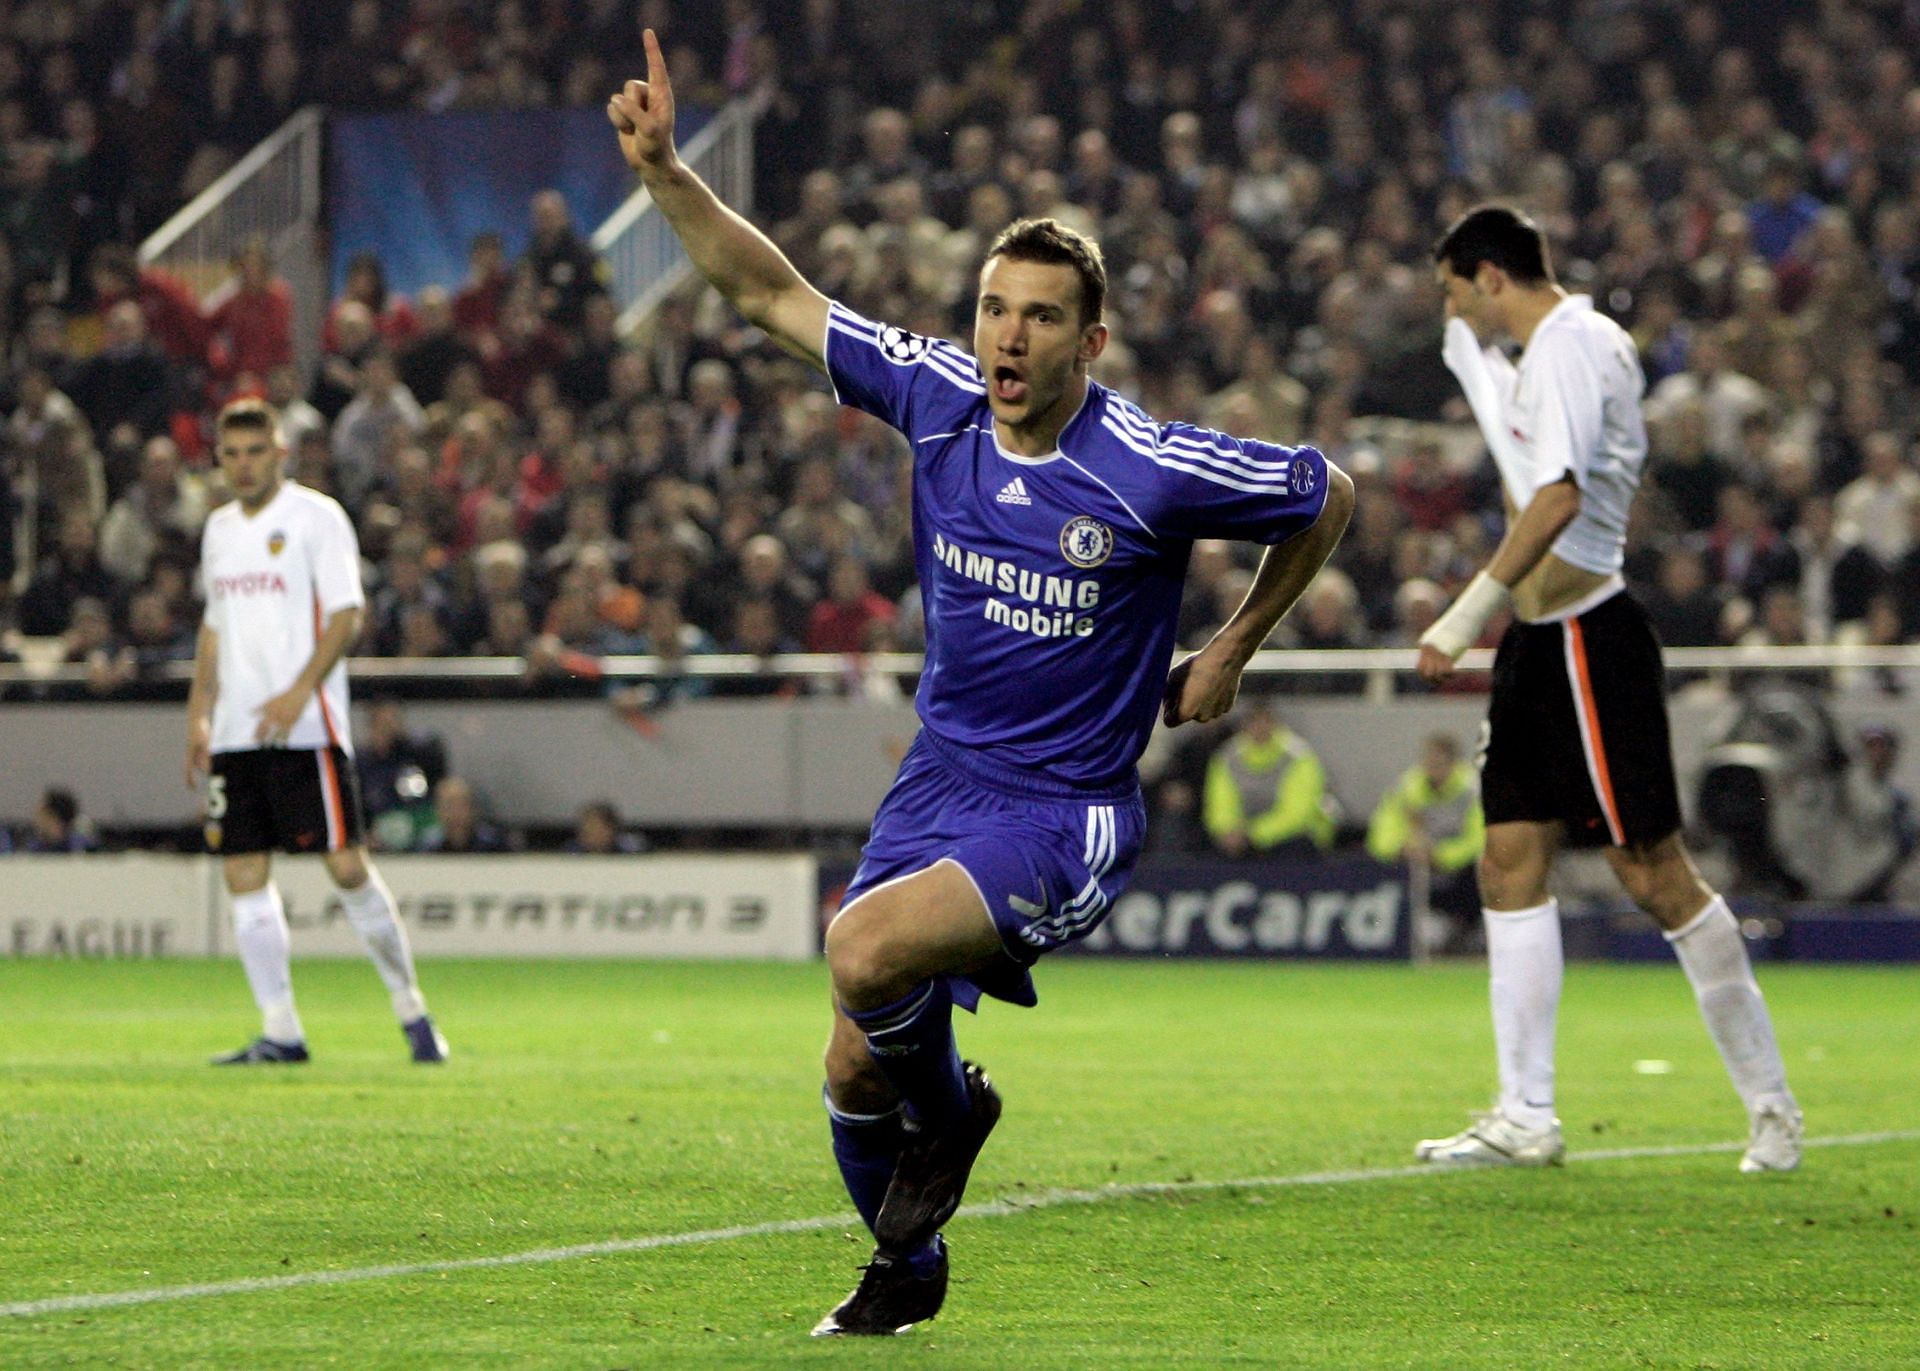 Shevchenko scored only one goal in the quarterfinals for Chelsea against Valencia